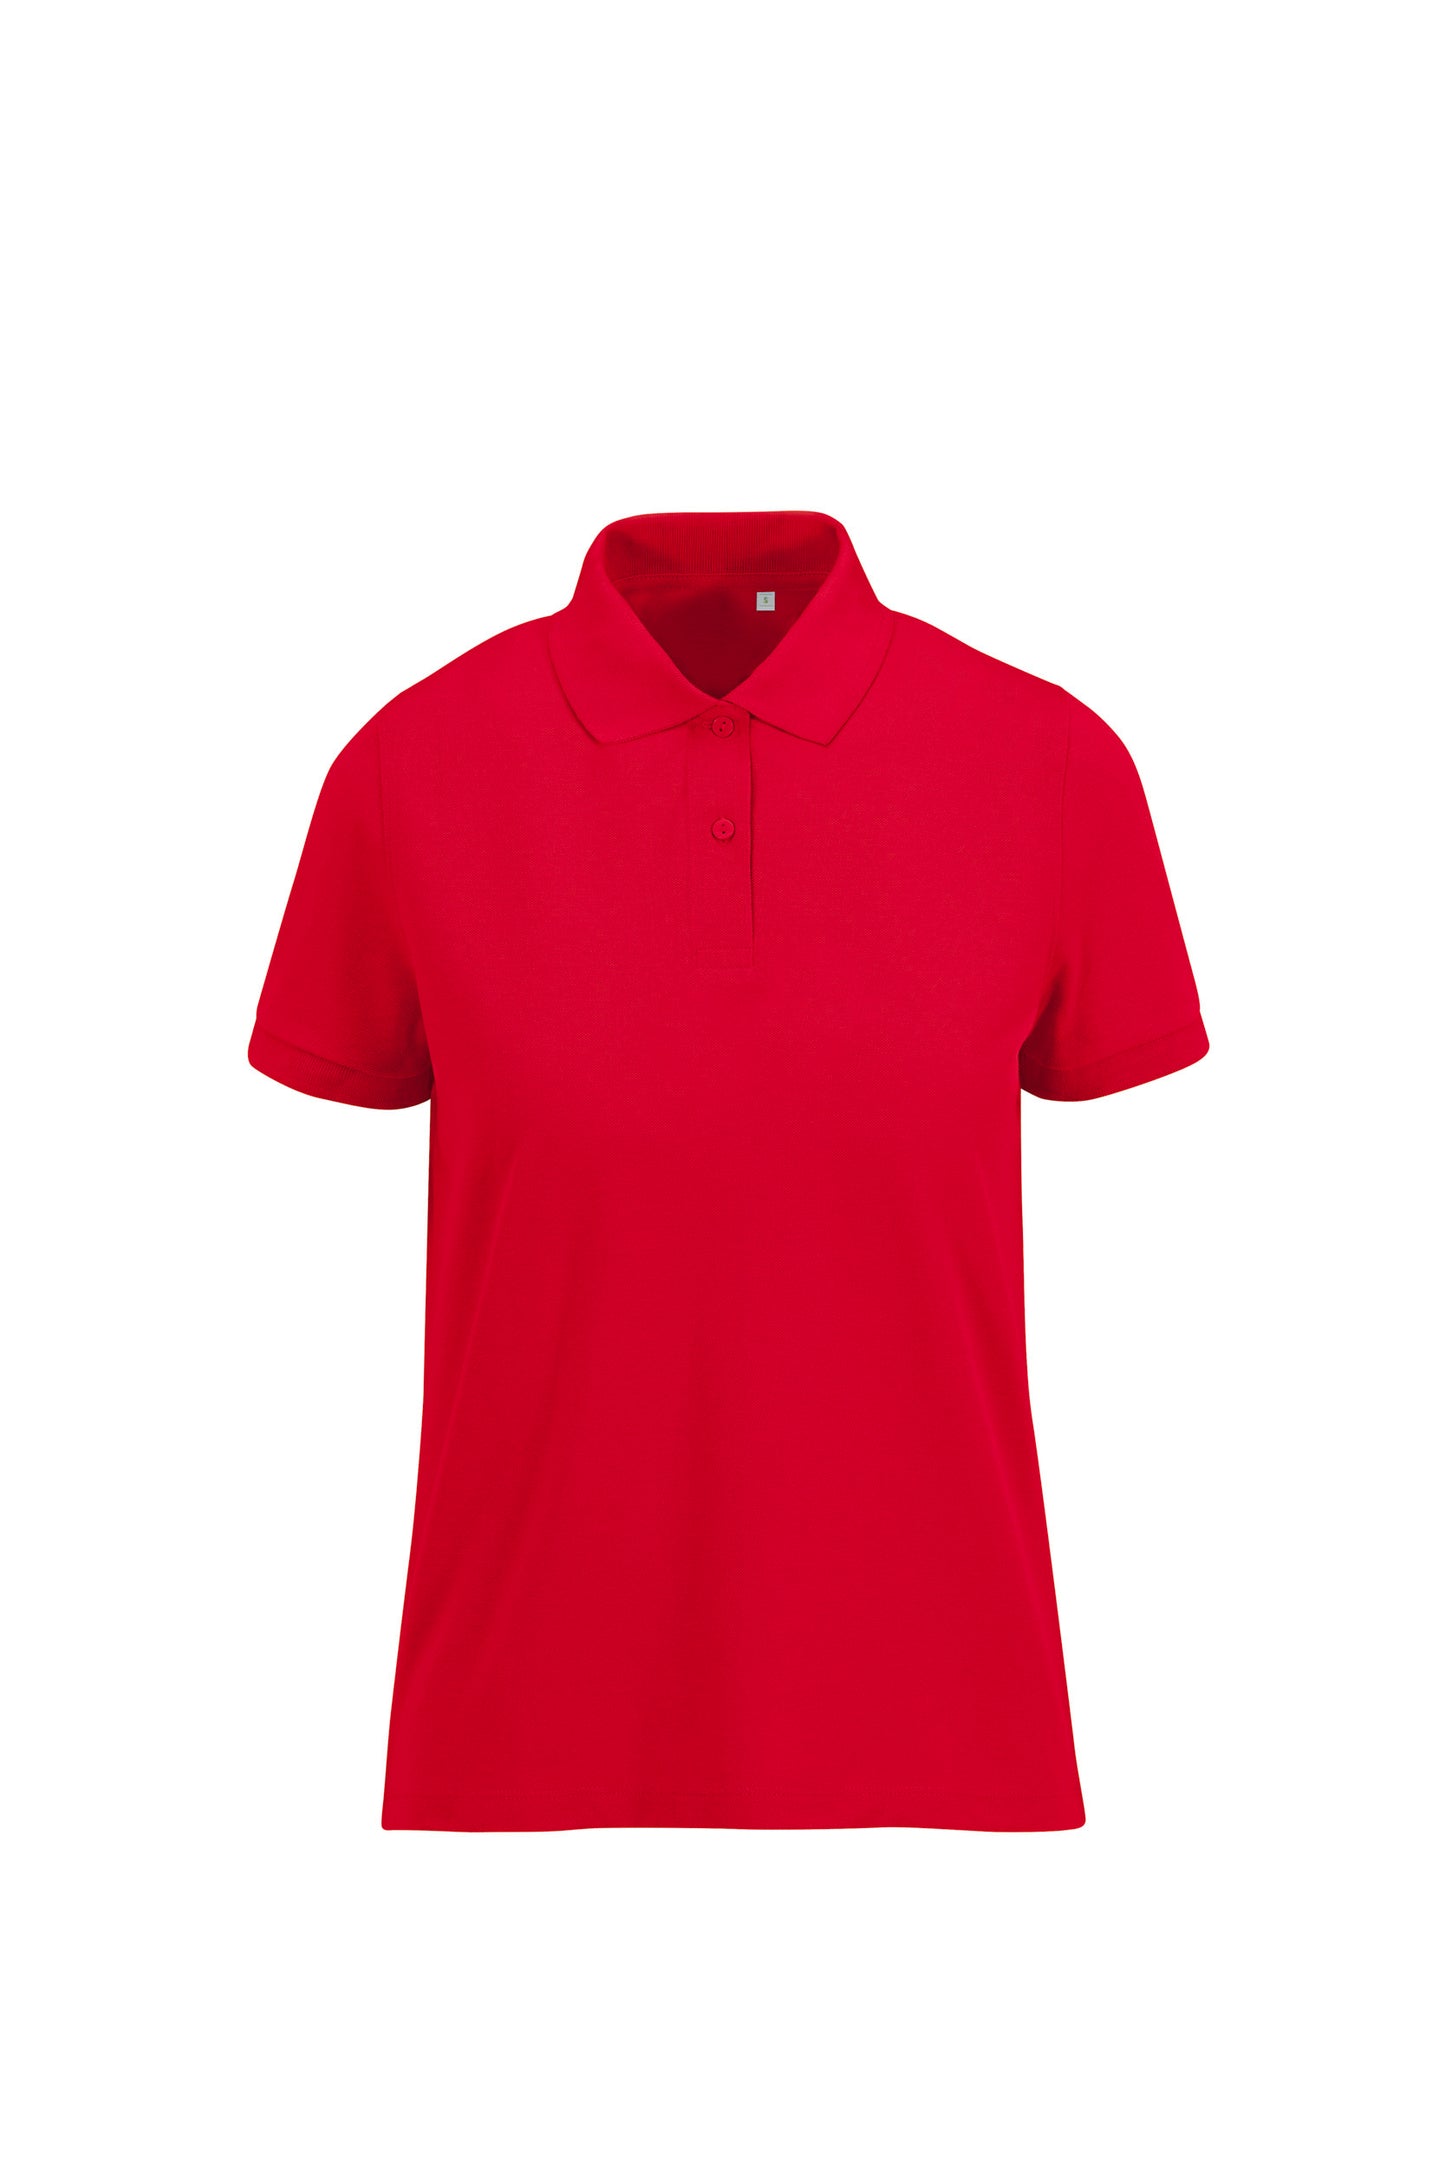 CGPW465 - MY ECO POLO 65/35 Femme manches courtes